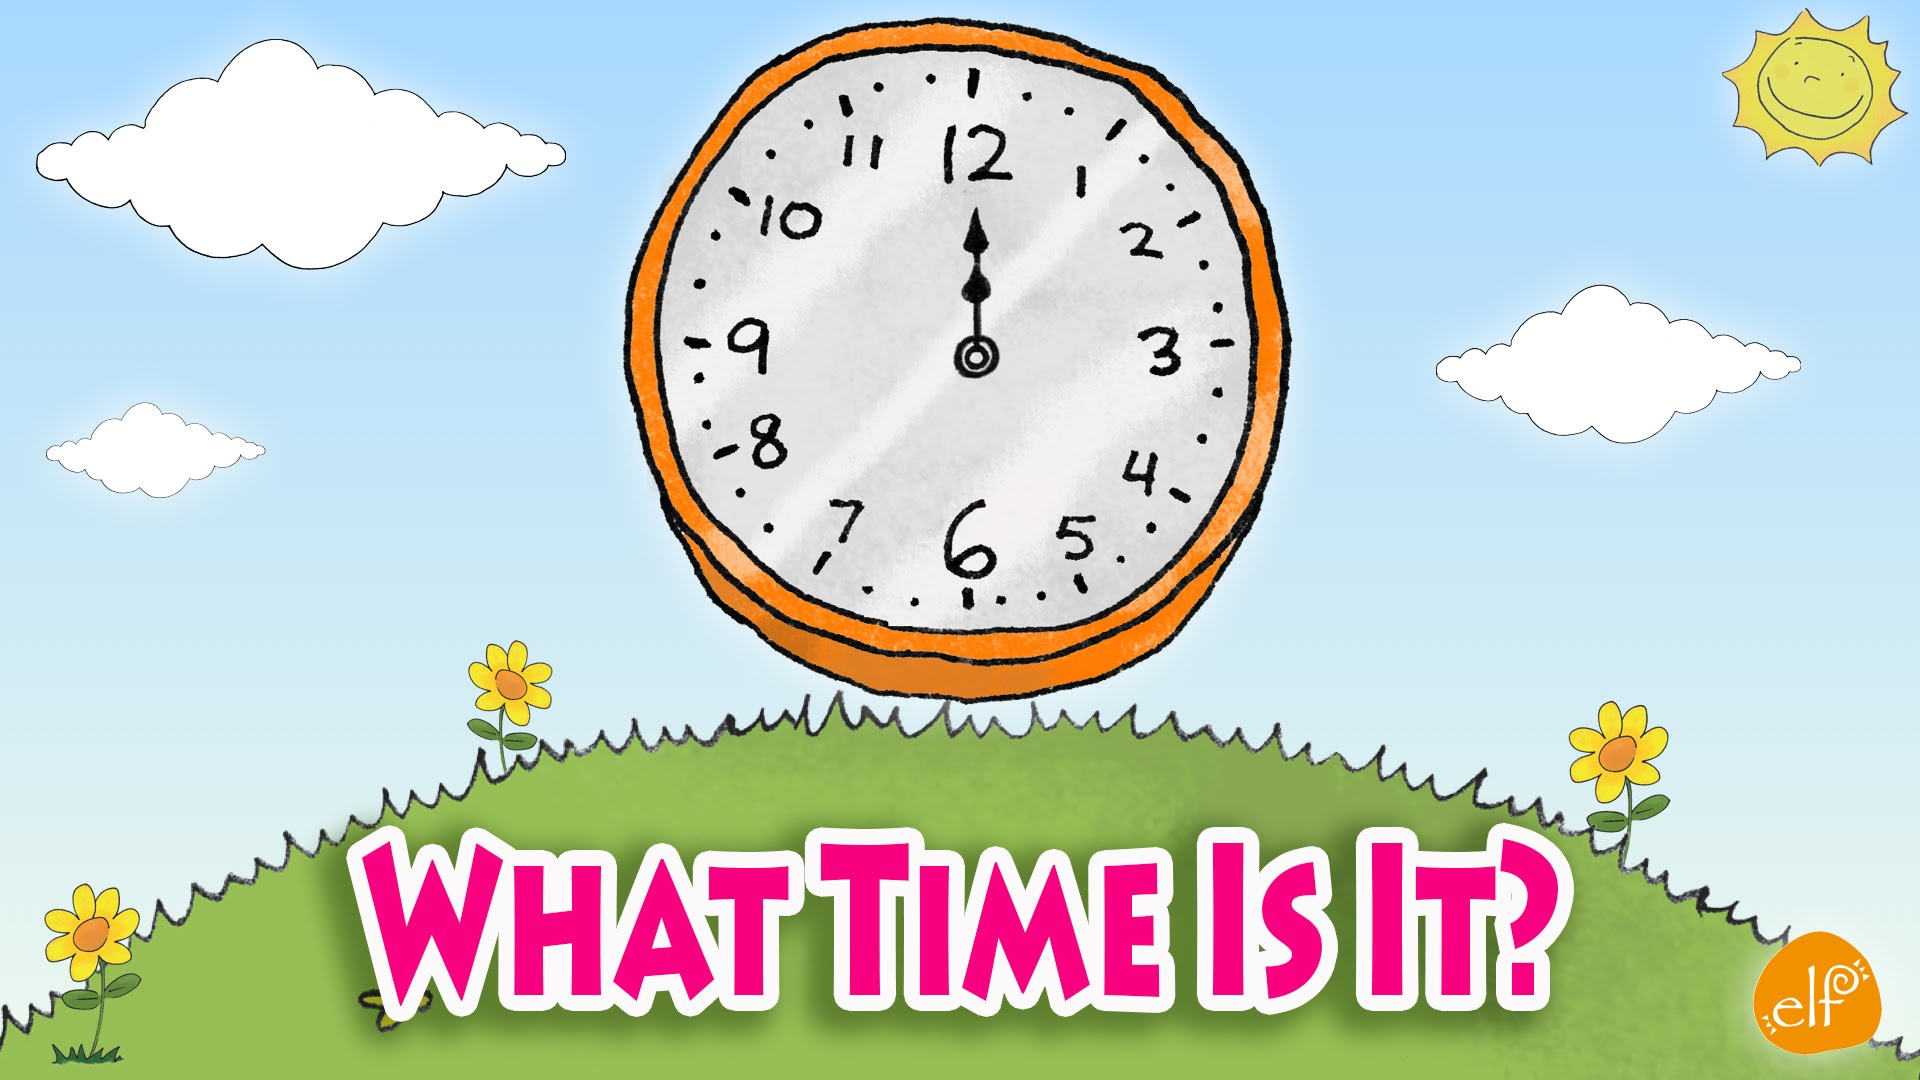 What the time для детей. What time is it для детей. What time is it картинка. Часы картинка для детей. Afternoon hours